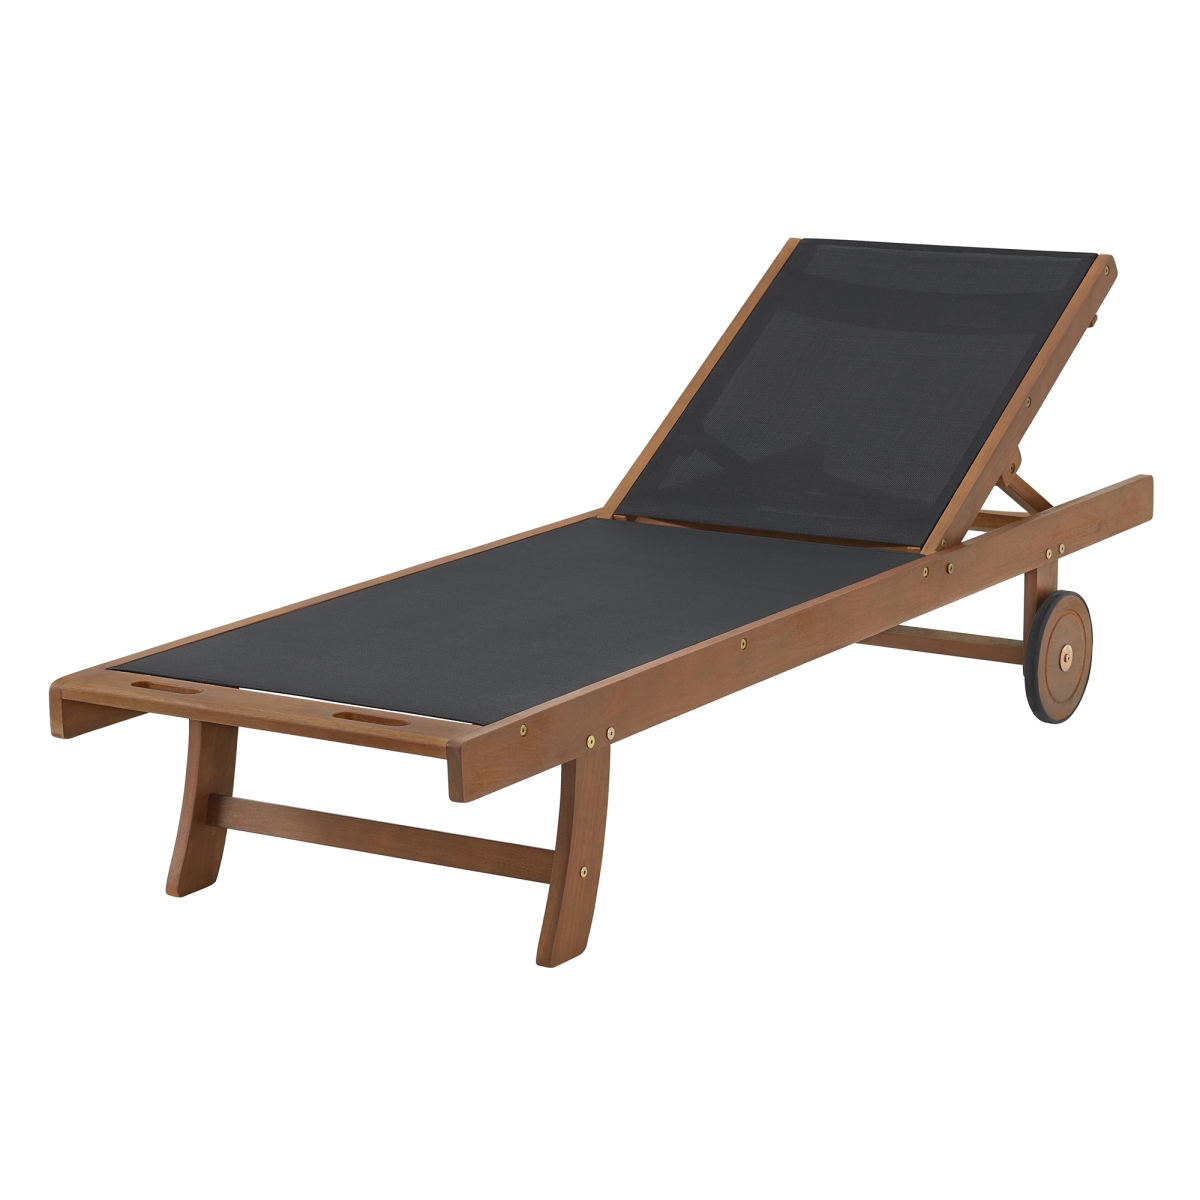 Picture of Alaterre ANCP01EBO Caspian Eucalyptus Wood Outdoor Lounge Chair with Mesh Seating